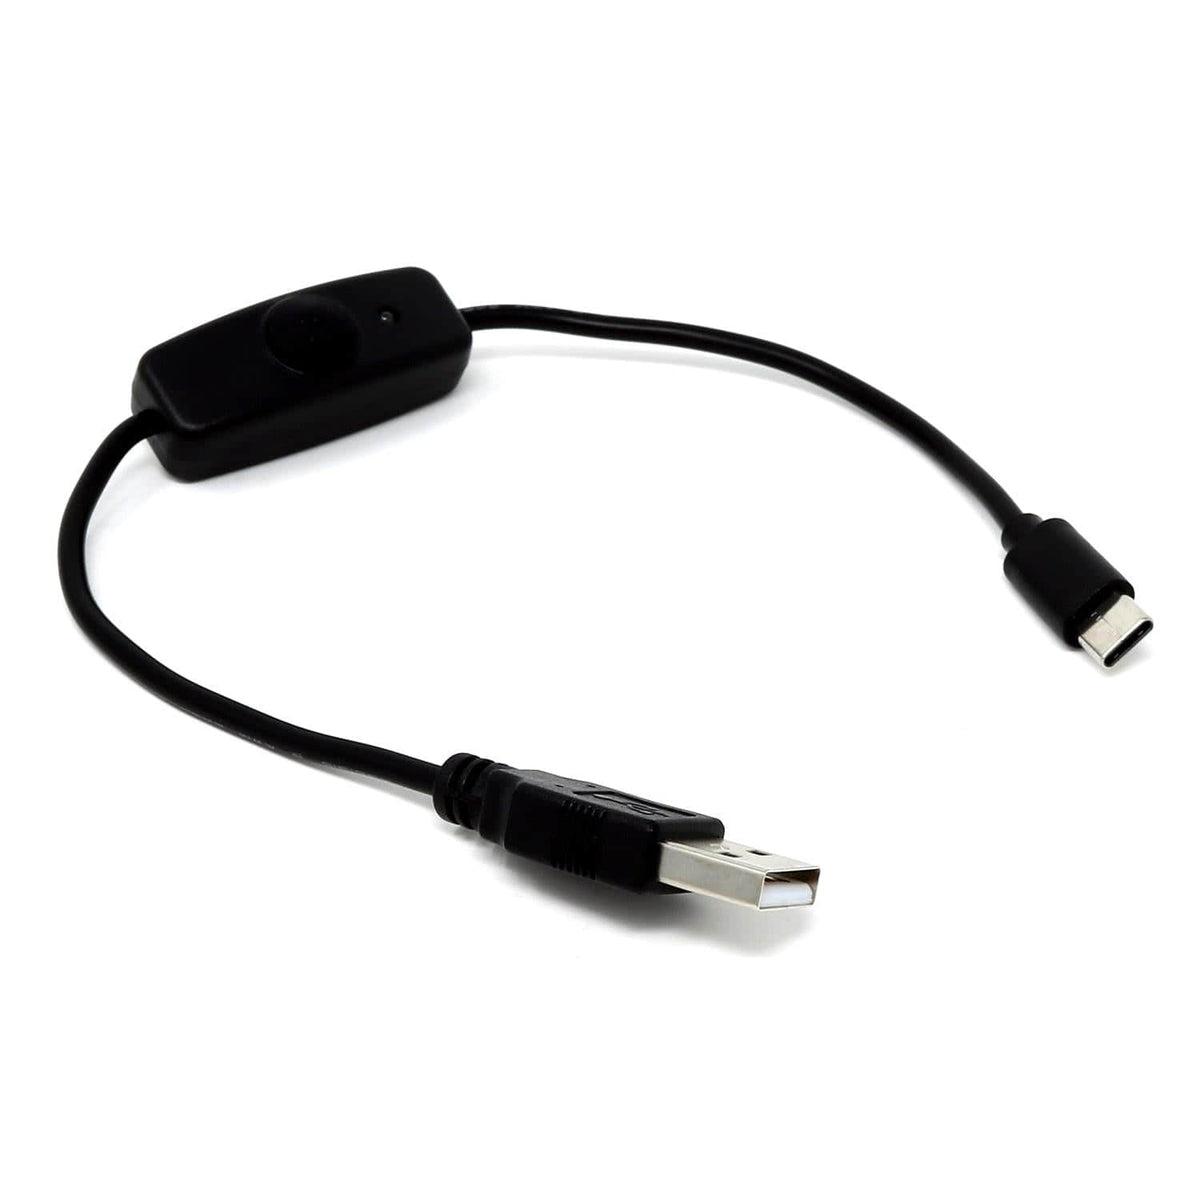 USB-A to USB-C Cable with On/Off | The Pi Hut